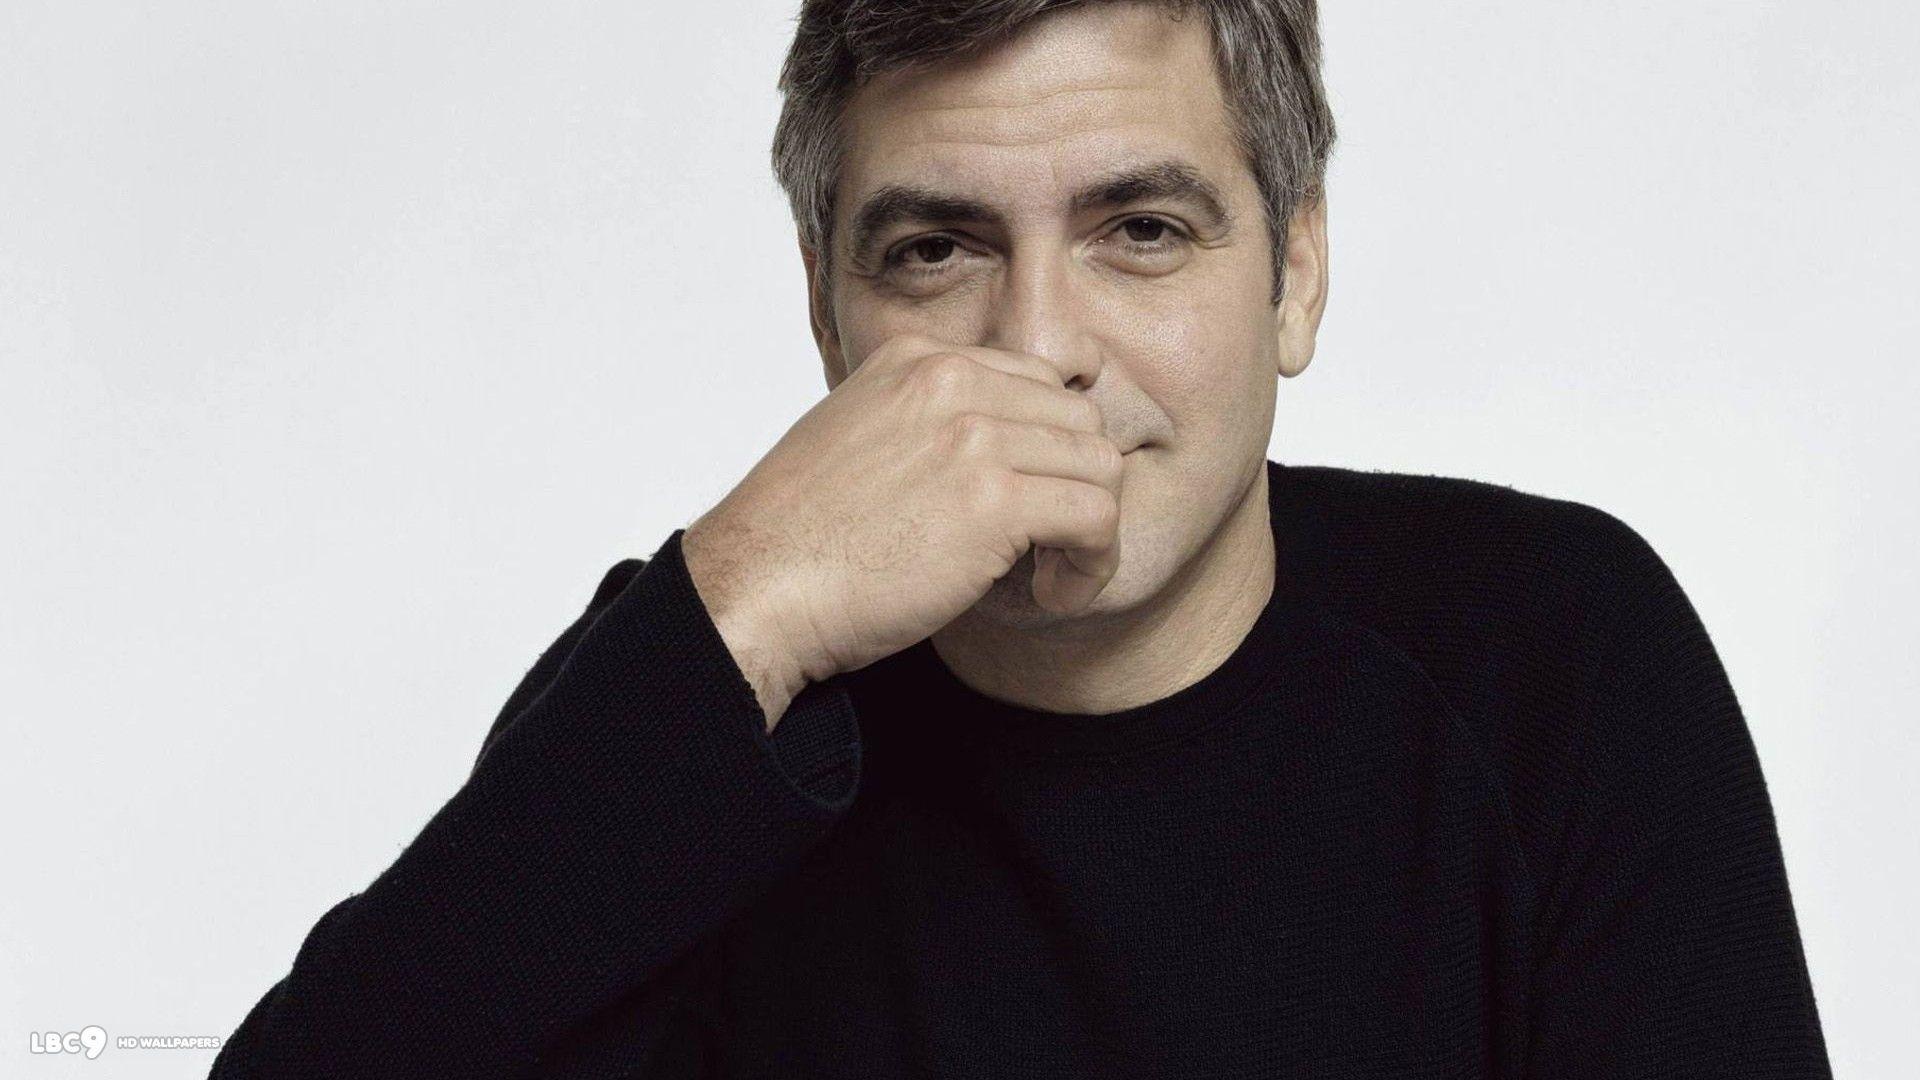 George Clooney, Cool wallpapers, Handsome actor, Hollywood icon, 1920x1080 Full HD Desktop